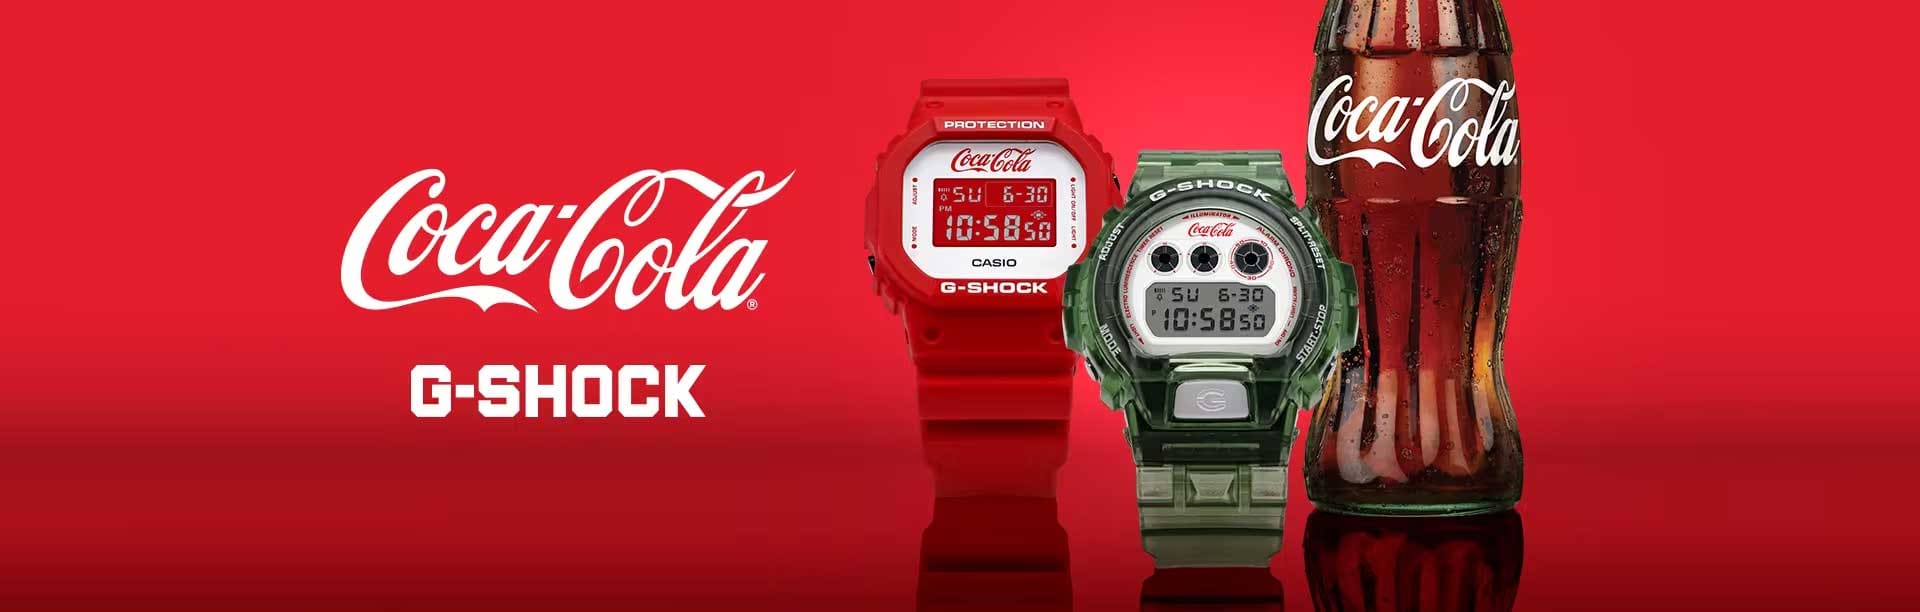 Coca-Cola and G-SHOCK logo with DW5600CC23-4 red digital and DW6900CC23-3 green digital Coca-Cola branded watches